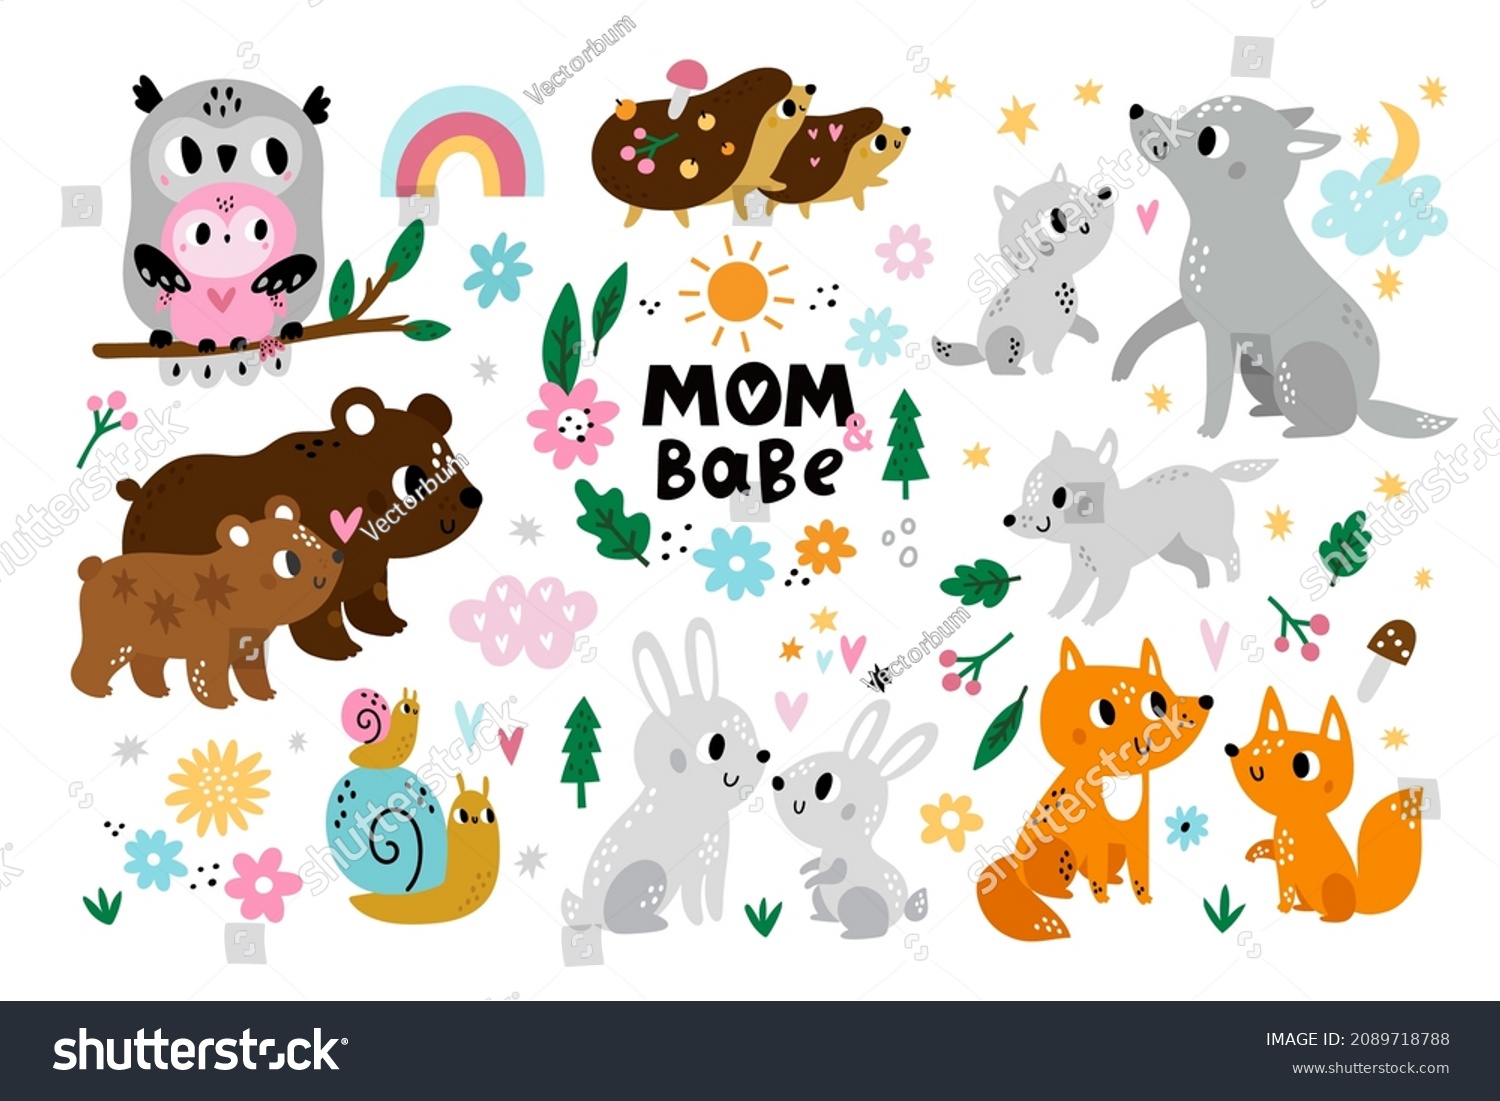 Cute parent and baby animals. Loving moms and cubs, forest animals and birds, hugging characters, wildlife mothers and kids, wild fauna families fox and bear, hedgehogs #2089718788